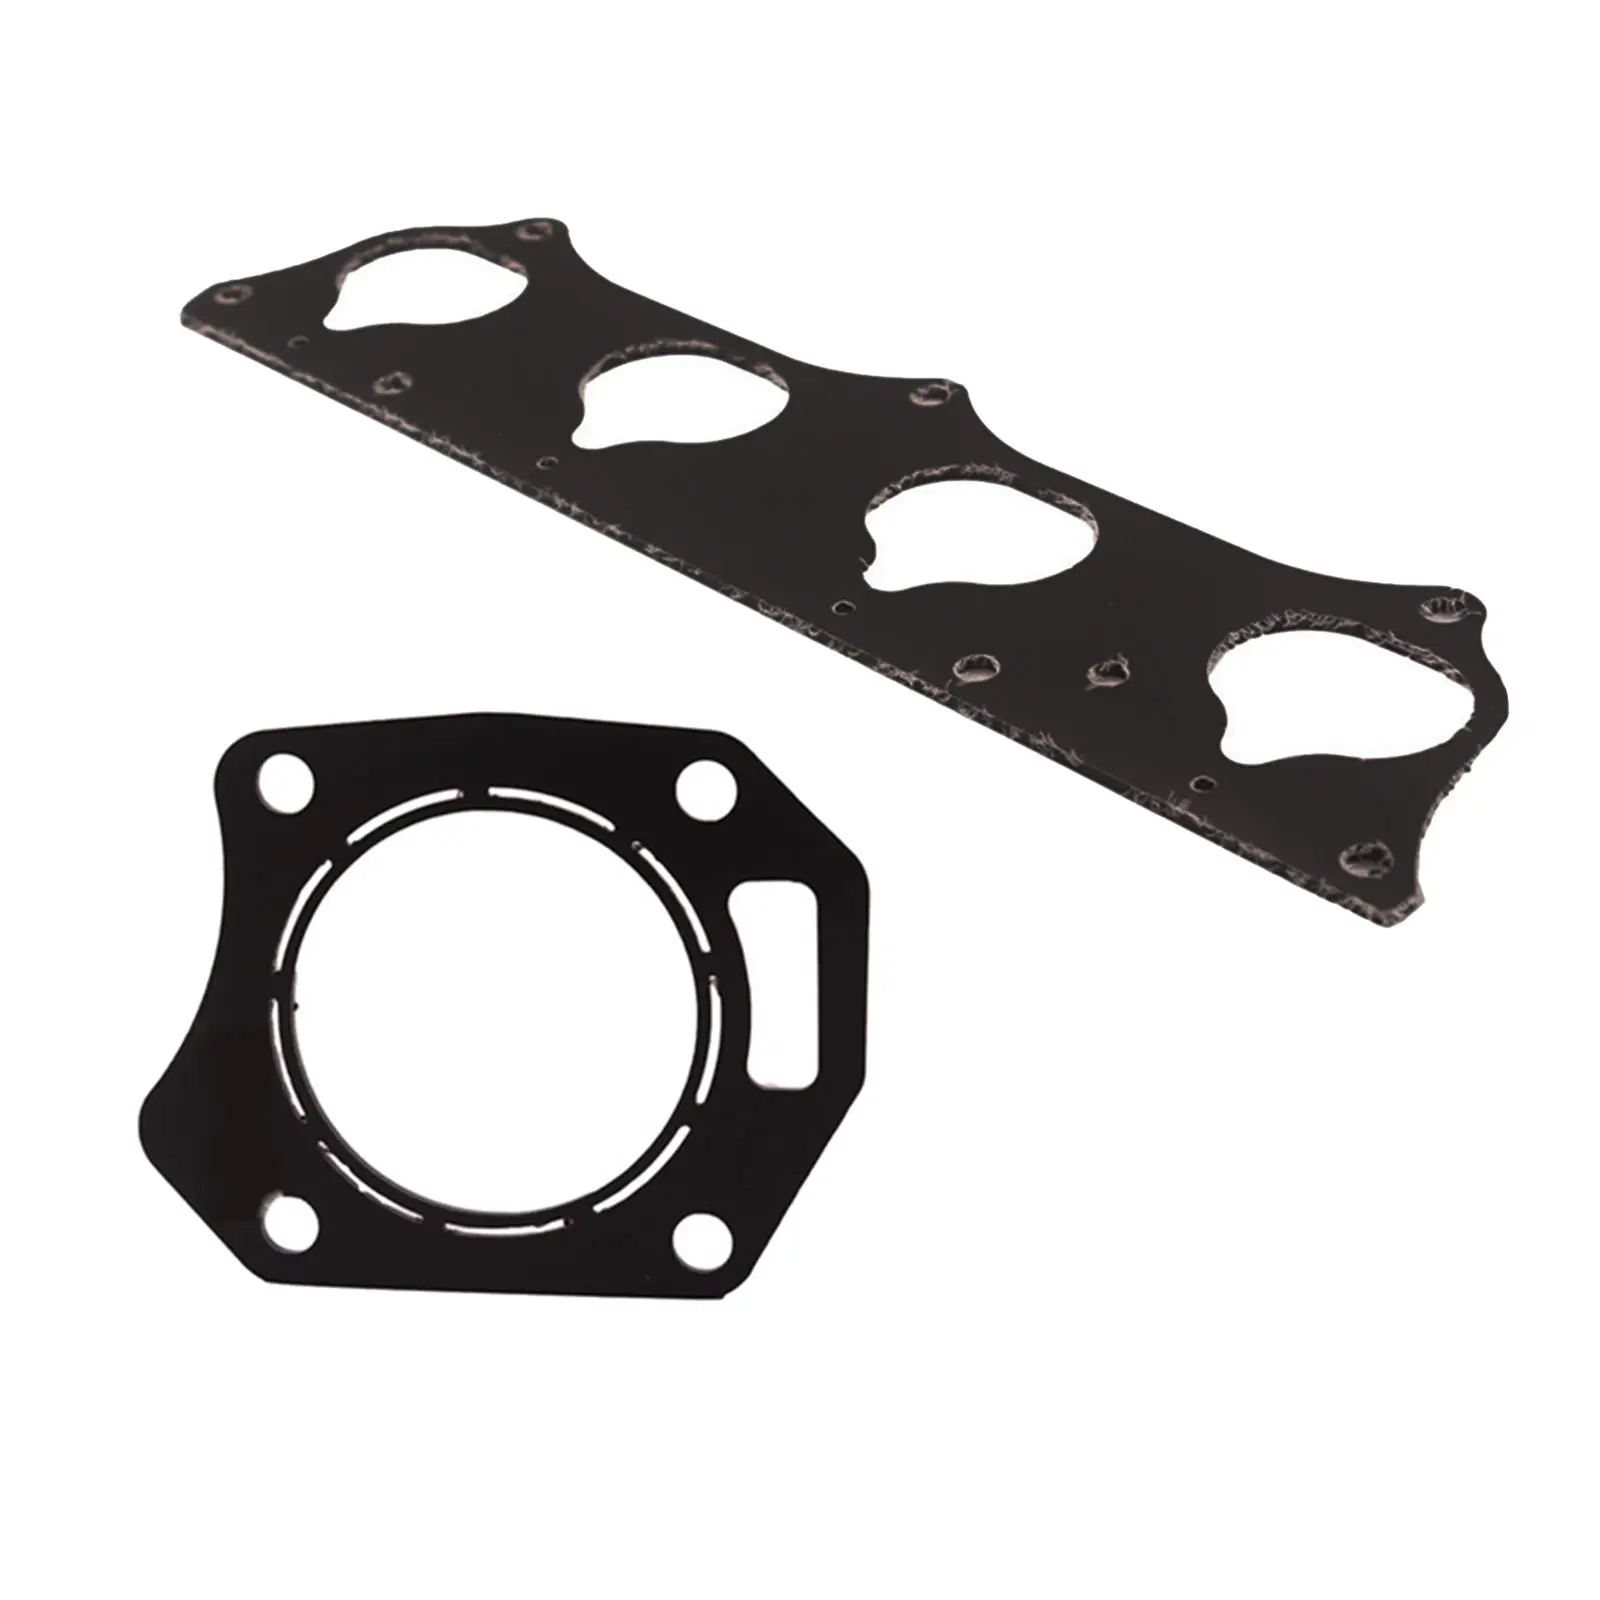 Intake Manifold Gasket For Honda Si and Acura RSX For Honda Civic Hatchback Si 2002-2005 For Acura RSX Type-S Base K20a - K20z